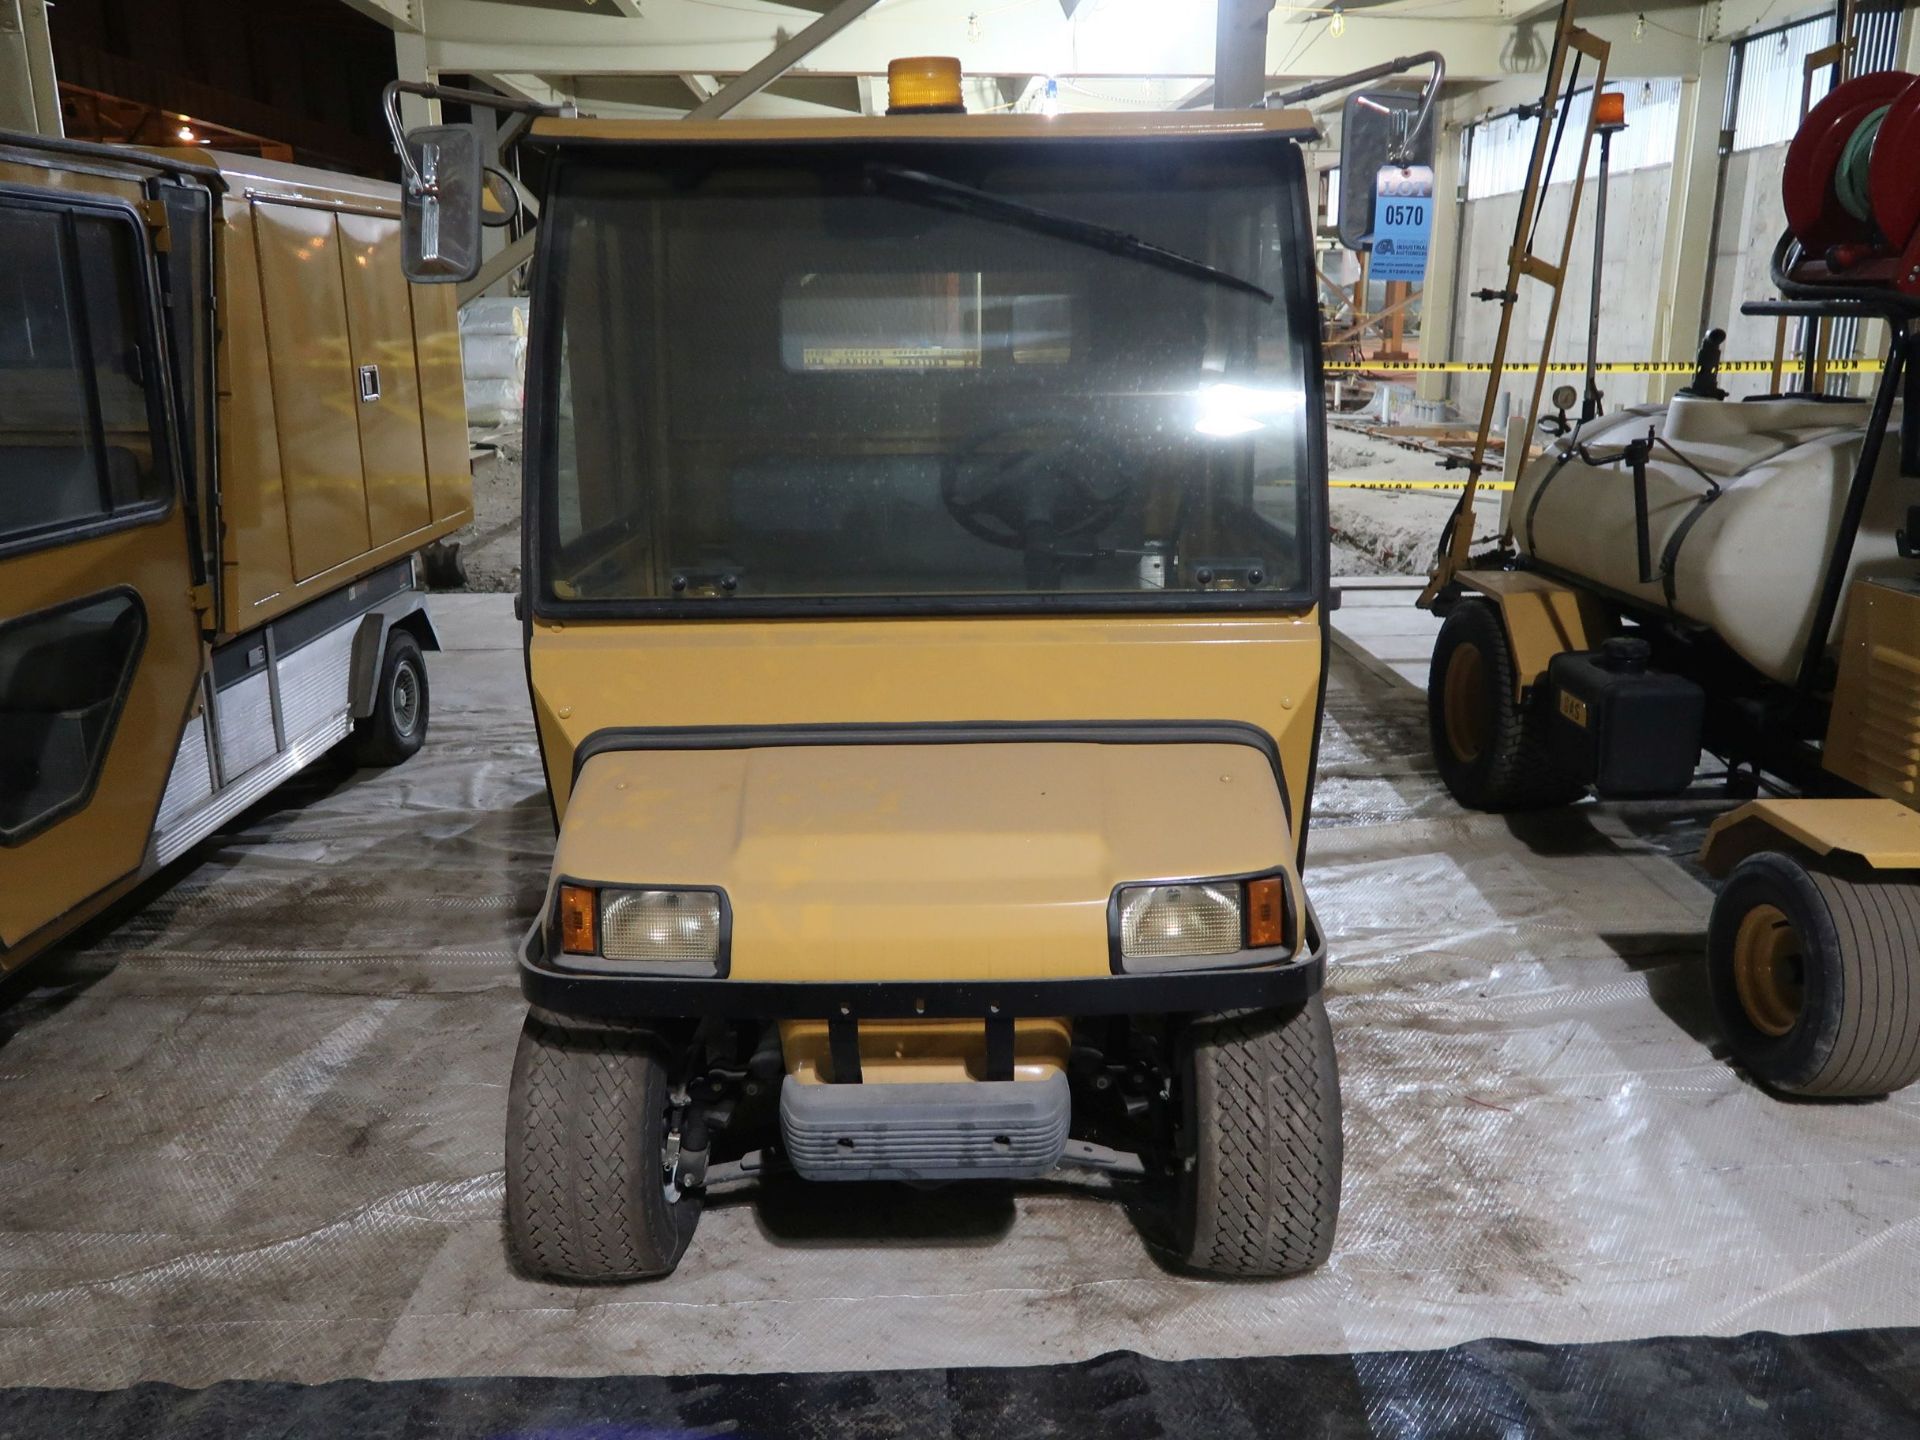 INGERSOLL RAND / CLUBCAR CARRYALL 6 ELECTRIC ENCLOSED REAR MAINTENANCE CART; S/N J0531-528157, 48" X - Image 2 of 6